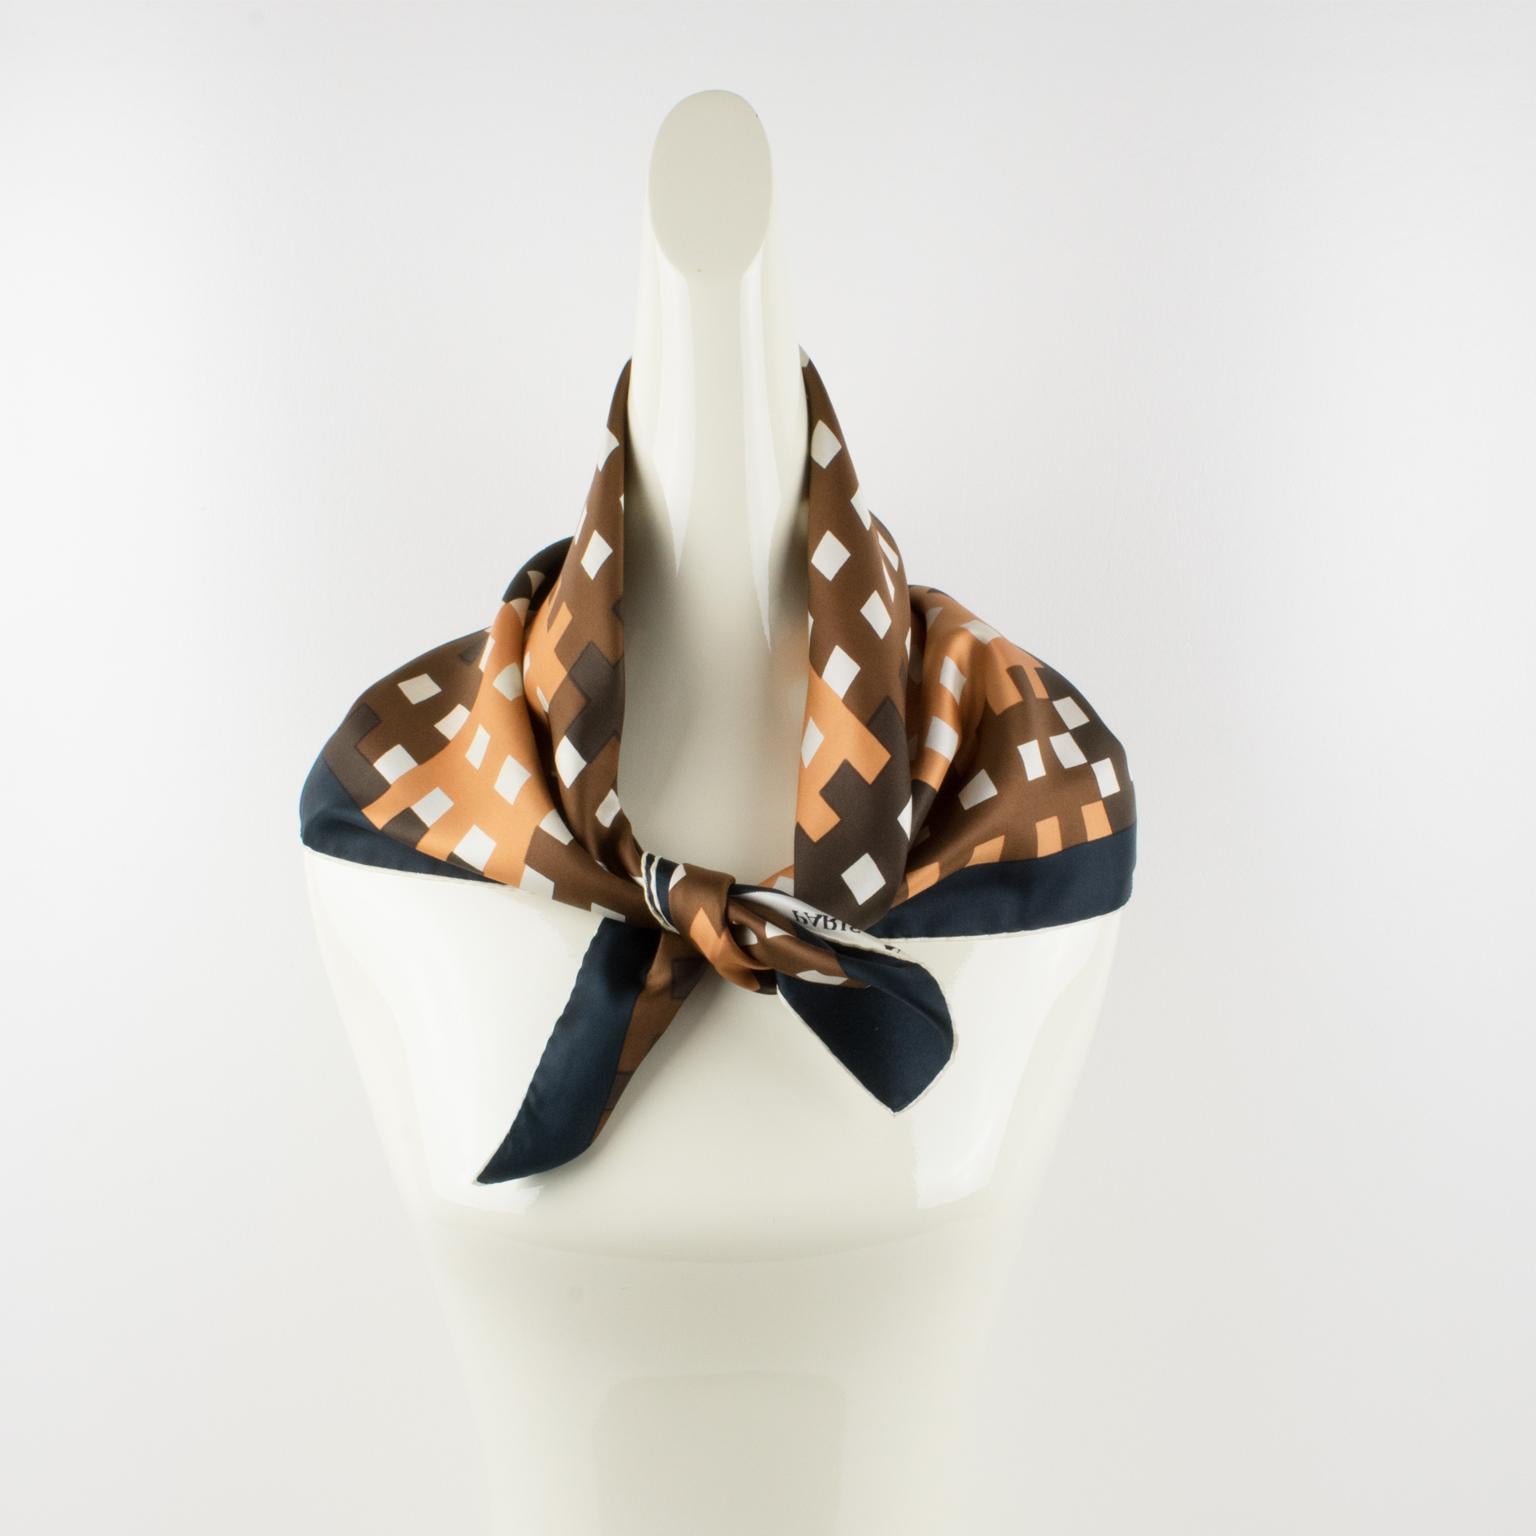 This elegant silk scarf by Lanvin Paris features a typical 1970s geometric print pattern. The combination of colors is bright and vibrant, with beige camel, beige cider, and brown spice over a white background with a hickory black border. The scarf